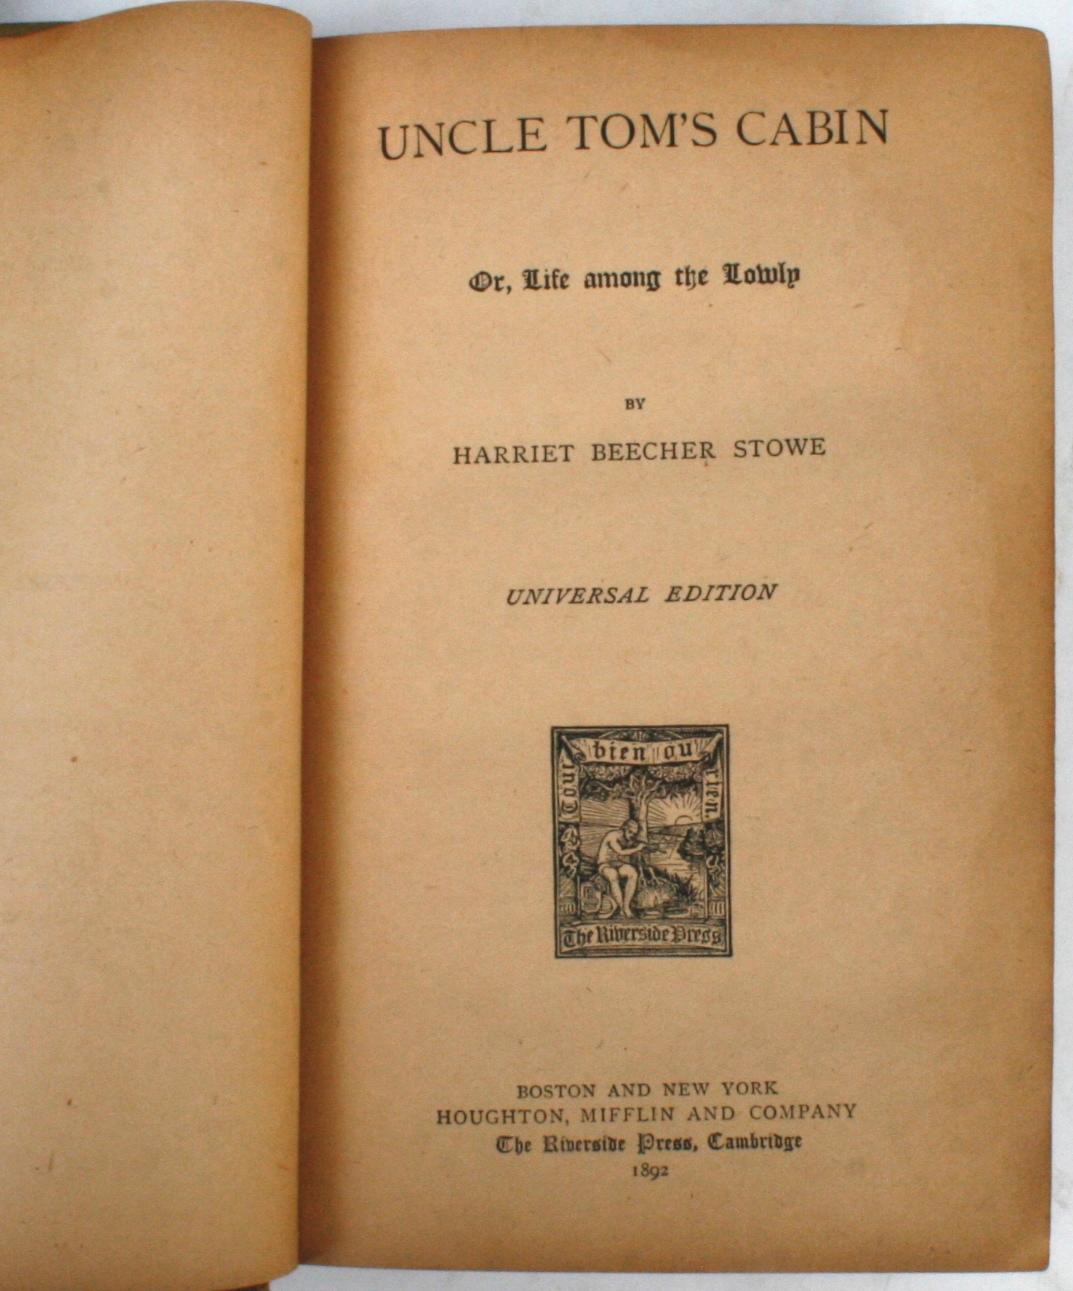 value of uncle tom's cabin book